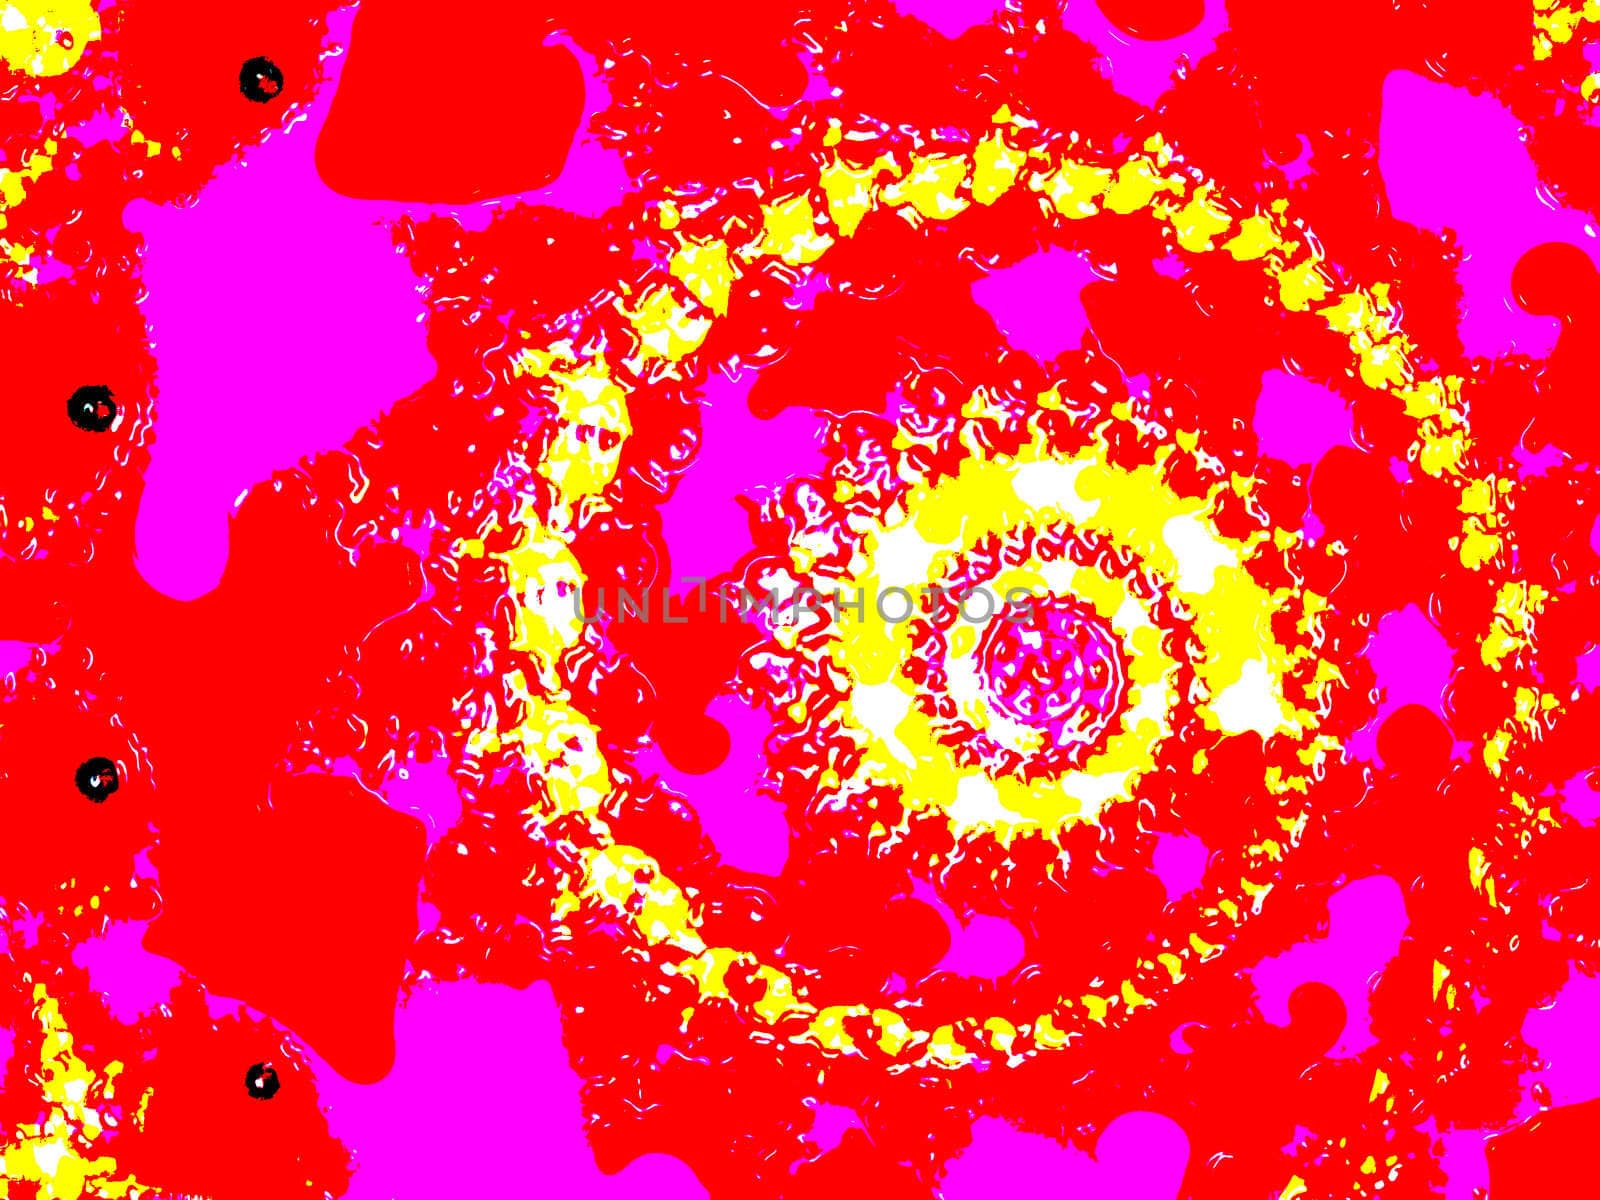 60s or 70s Style 2d Spiral Fractal Pink Pattern by bobbigmac